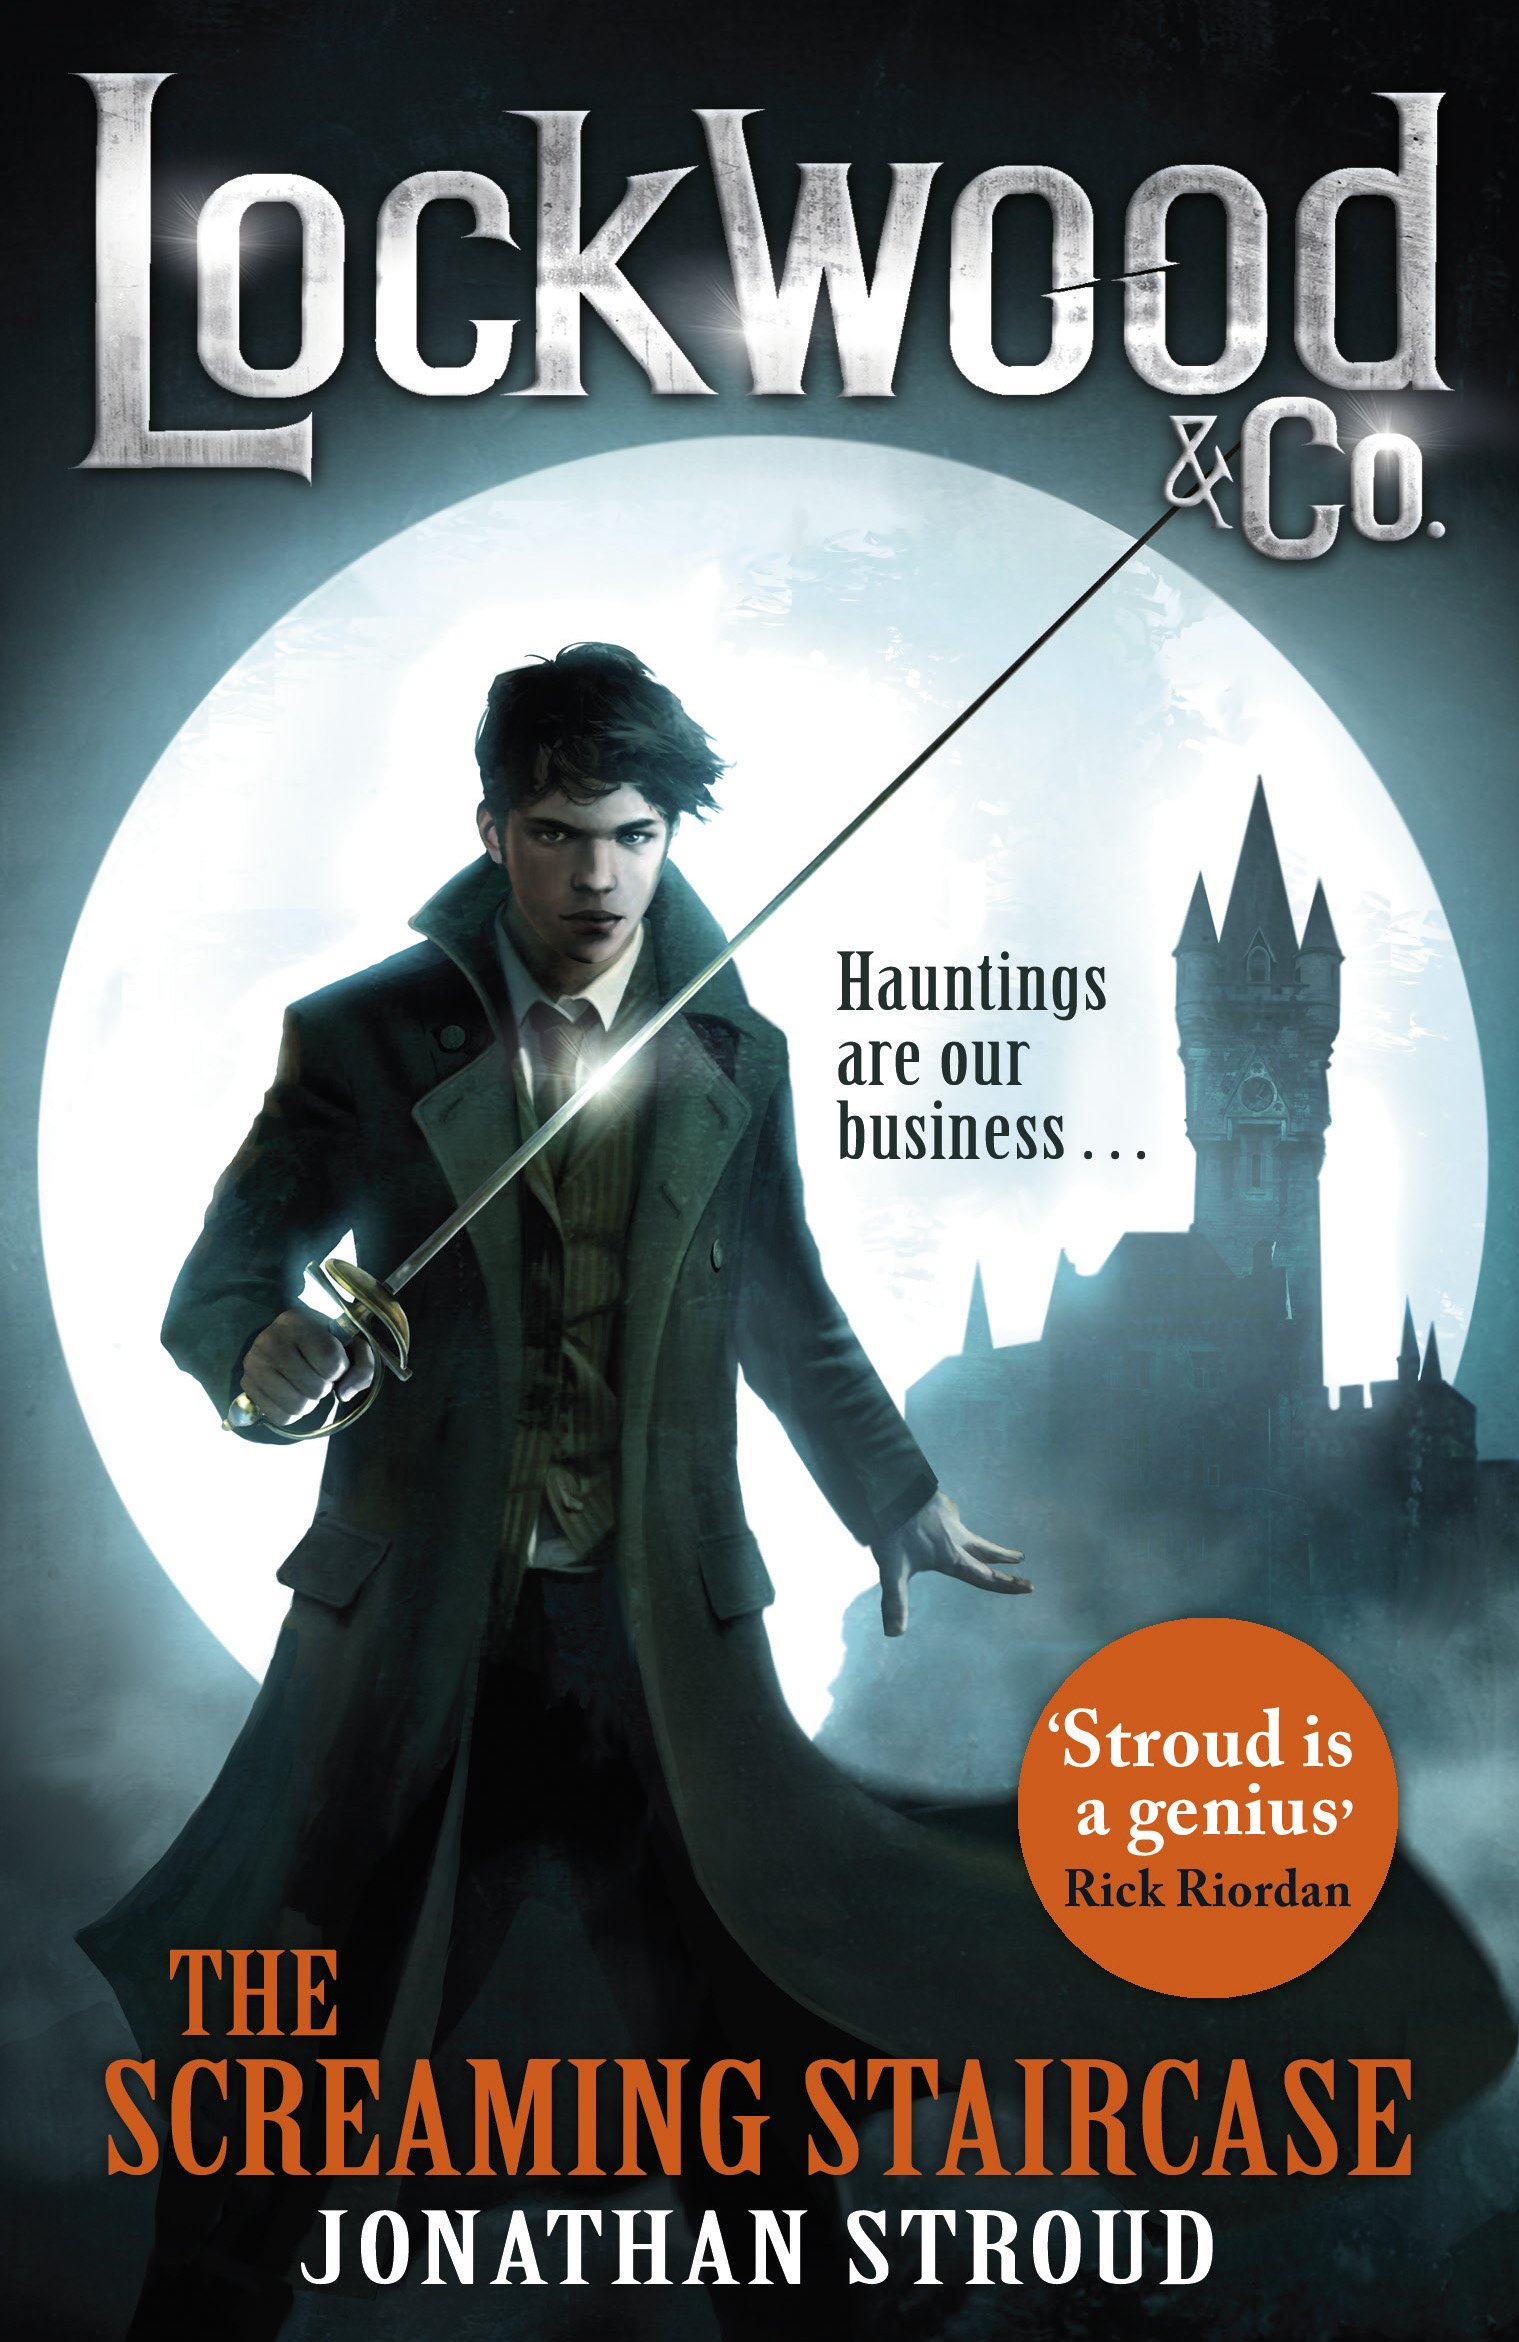 Lockwood & Co: The Screaming Staircase: Book 1